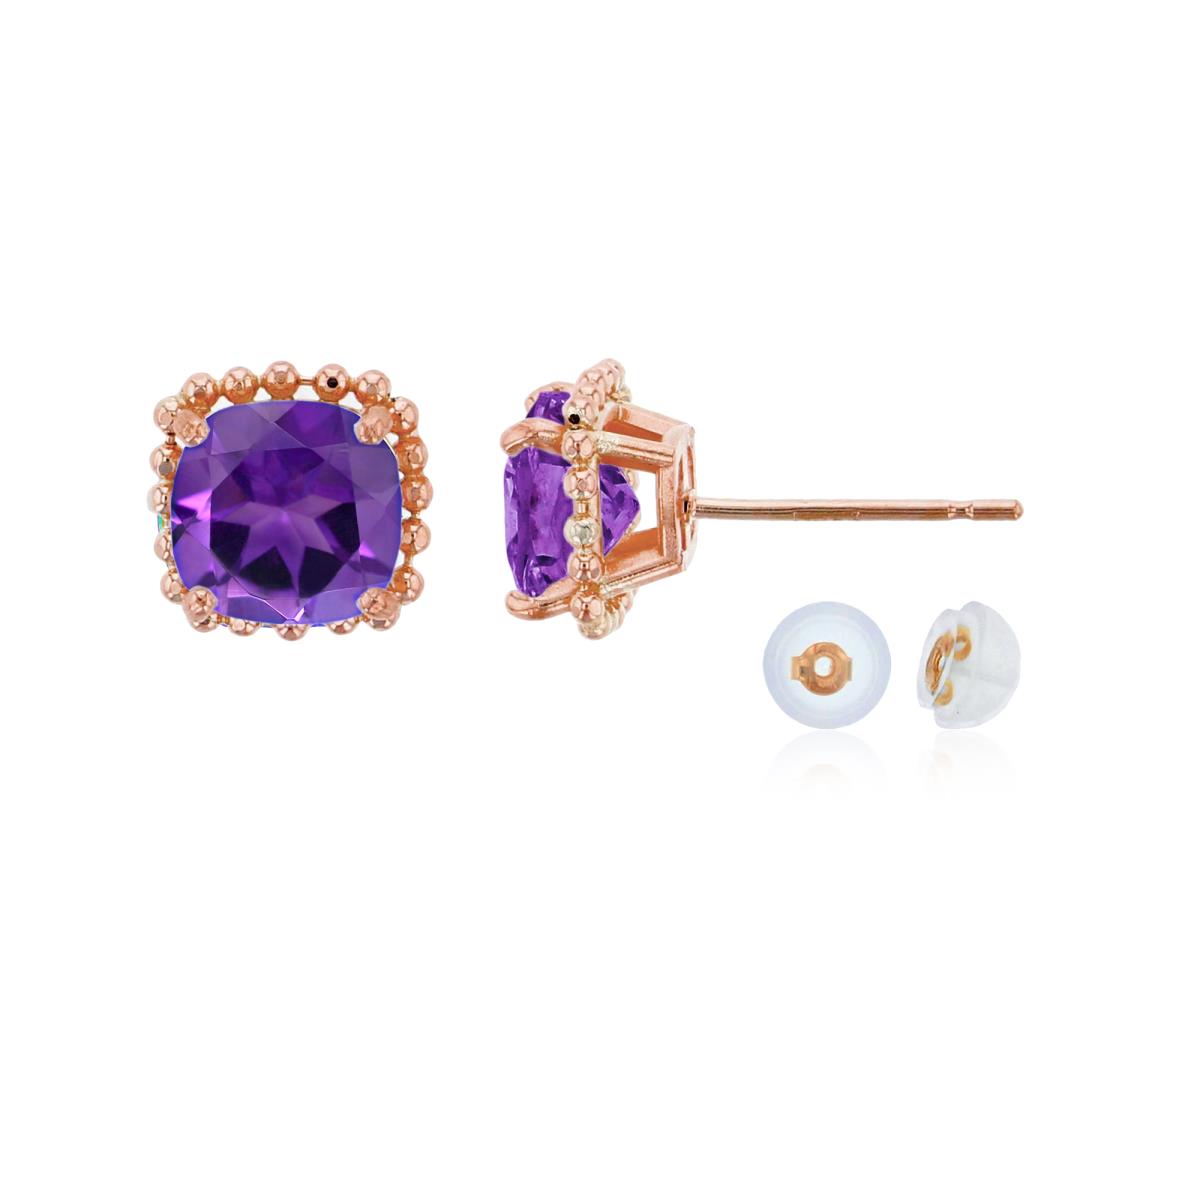 10K Rose Gold 6x6mm Cushion Cut Amethyst Bead Frame Stud Earring with Silicone Back